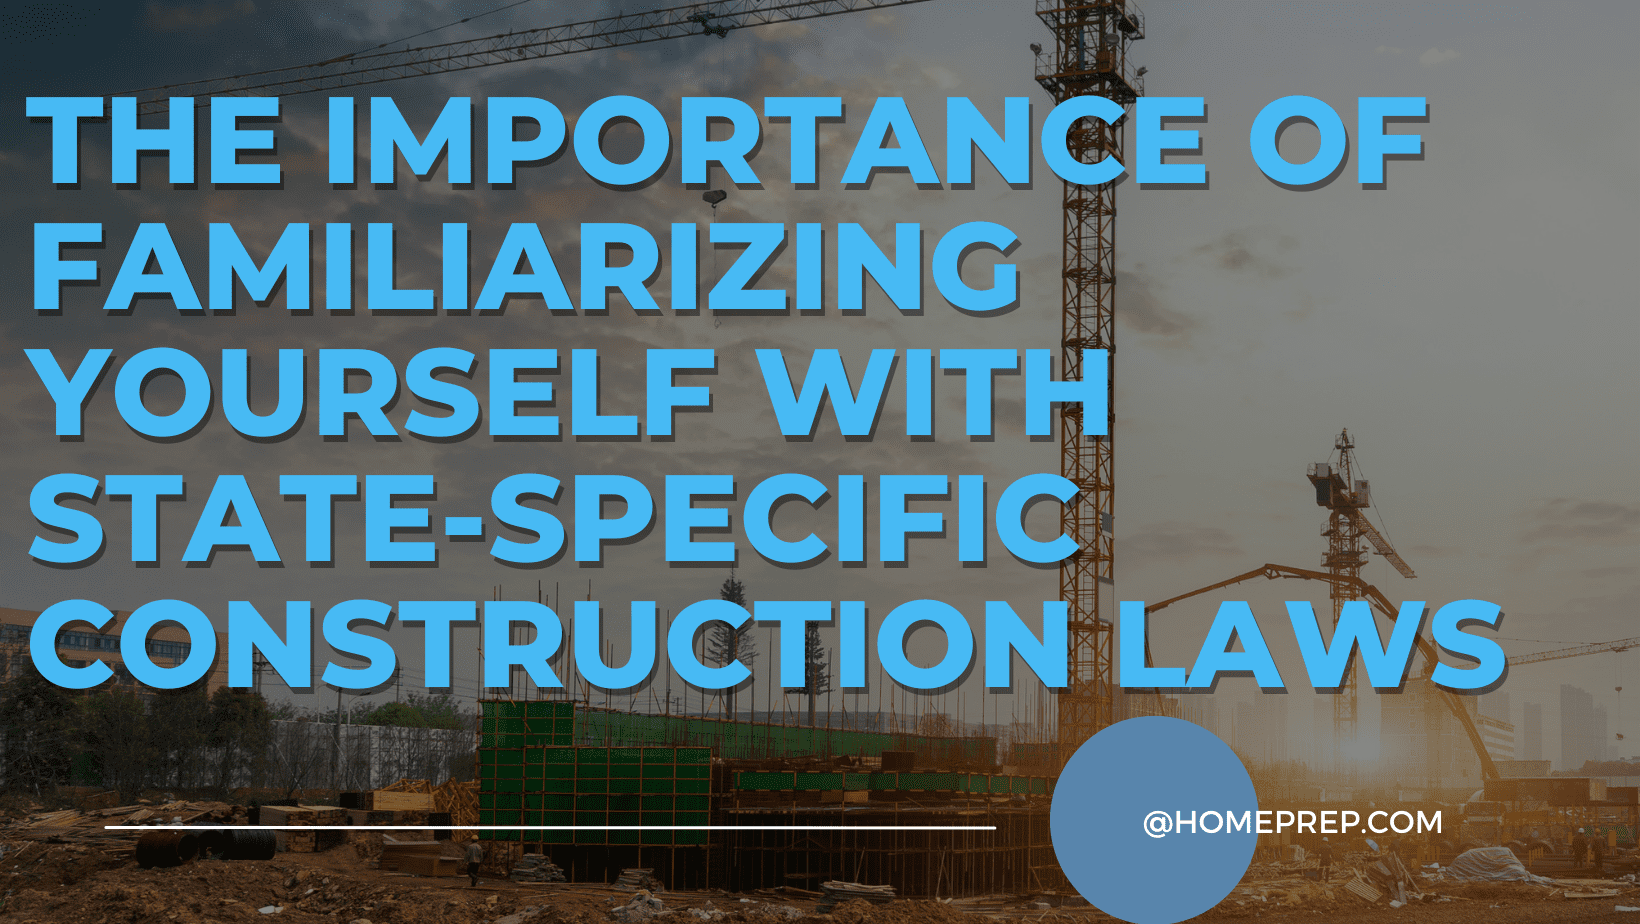 The Importance of Familiarizing Yourself with State-Specific Construction Laws